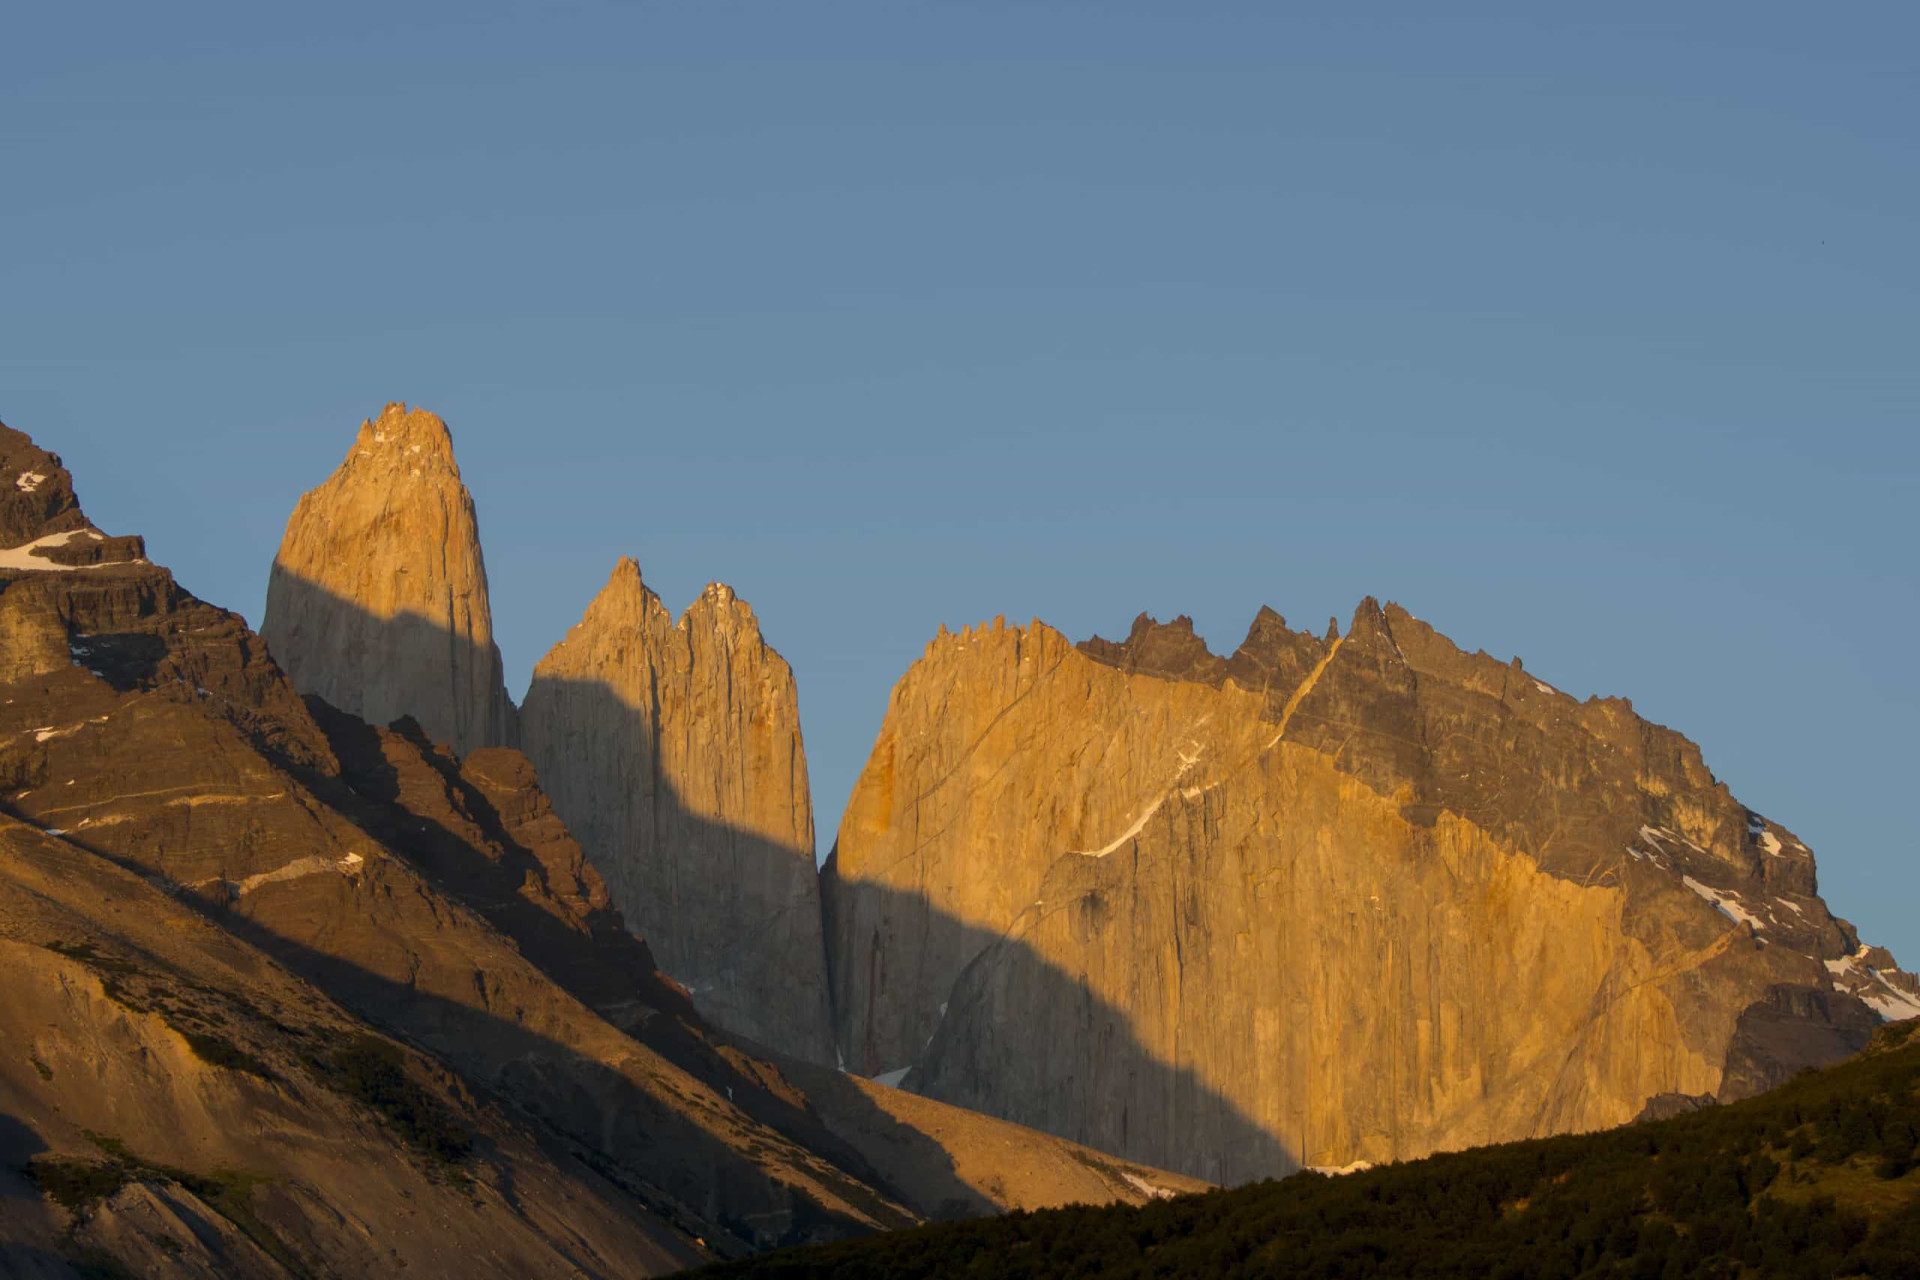 <p>Now we can cross over to the Chilean side of Patagonia where you will find the Cordillera del Paine, a very interestingly shaped mountain range.</p><p>You may also like:<a href="https://www.starsinsider.com/n/170344?utm_source=msn.com&utm_medium=display&utm_campaign=referral_description&utm_content=463556v2en-us"> Epic celebrity feuds!</a></p>